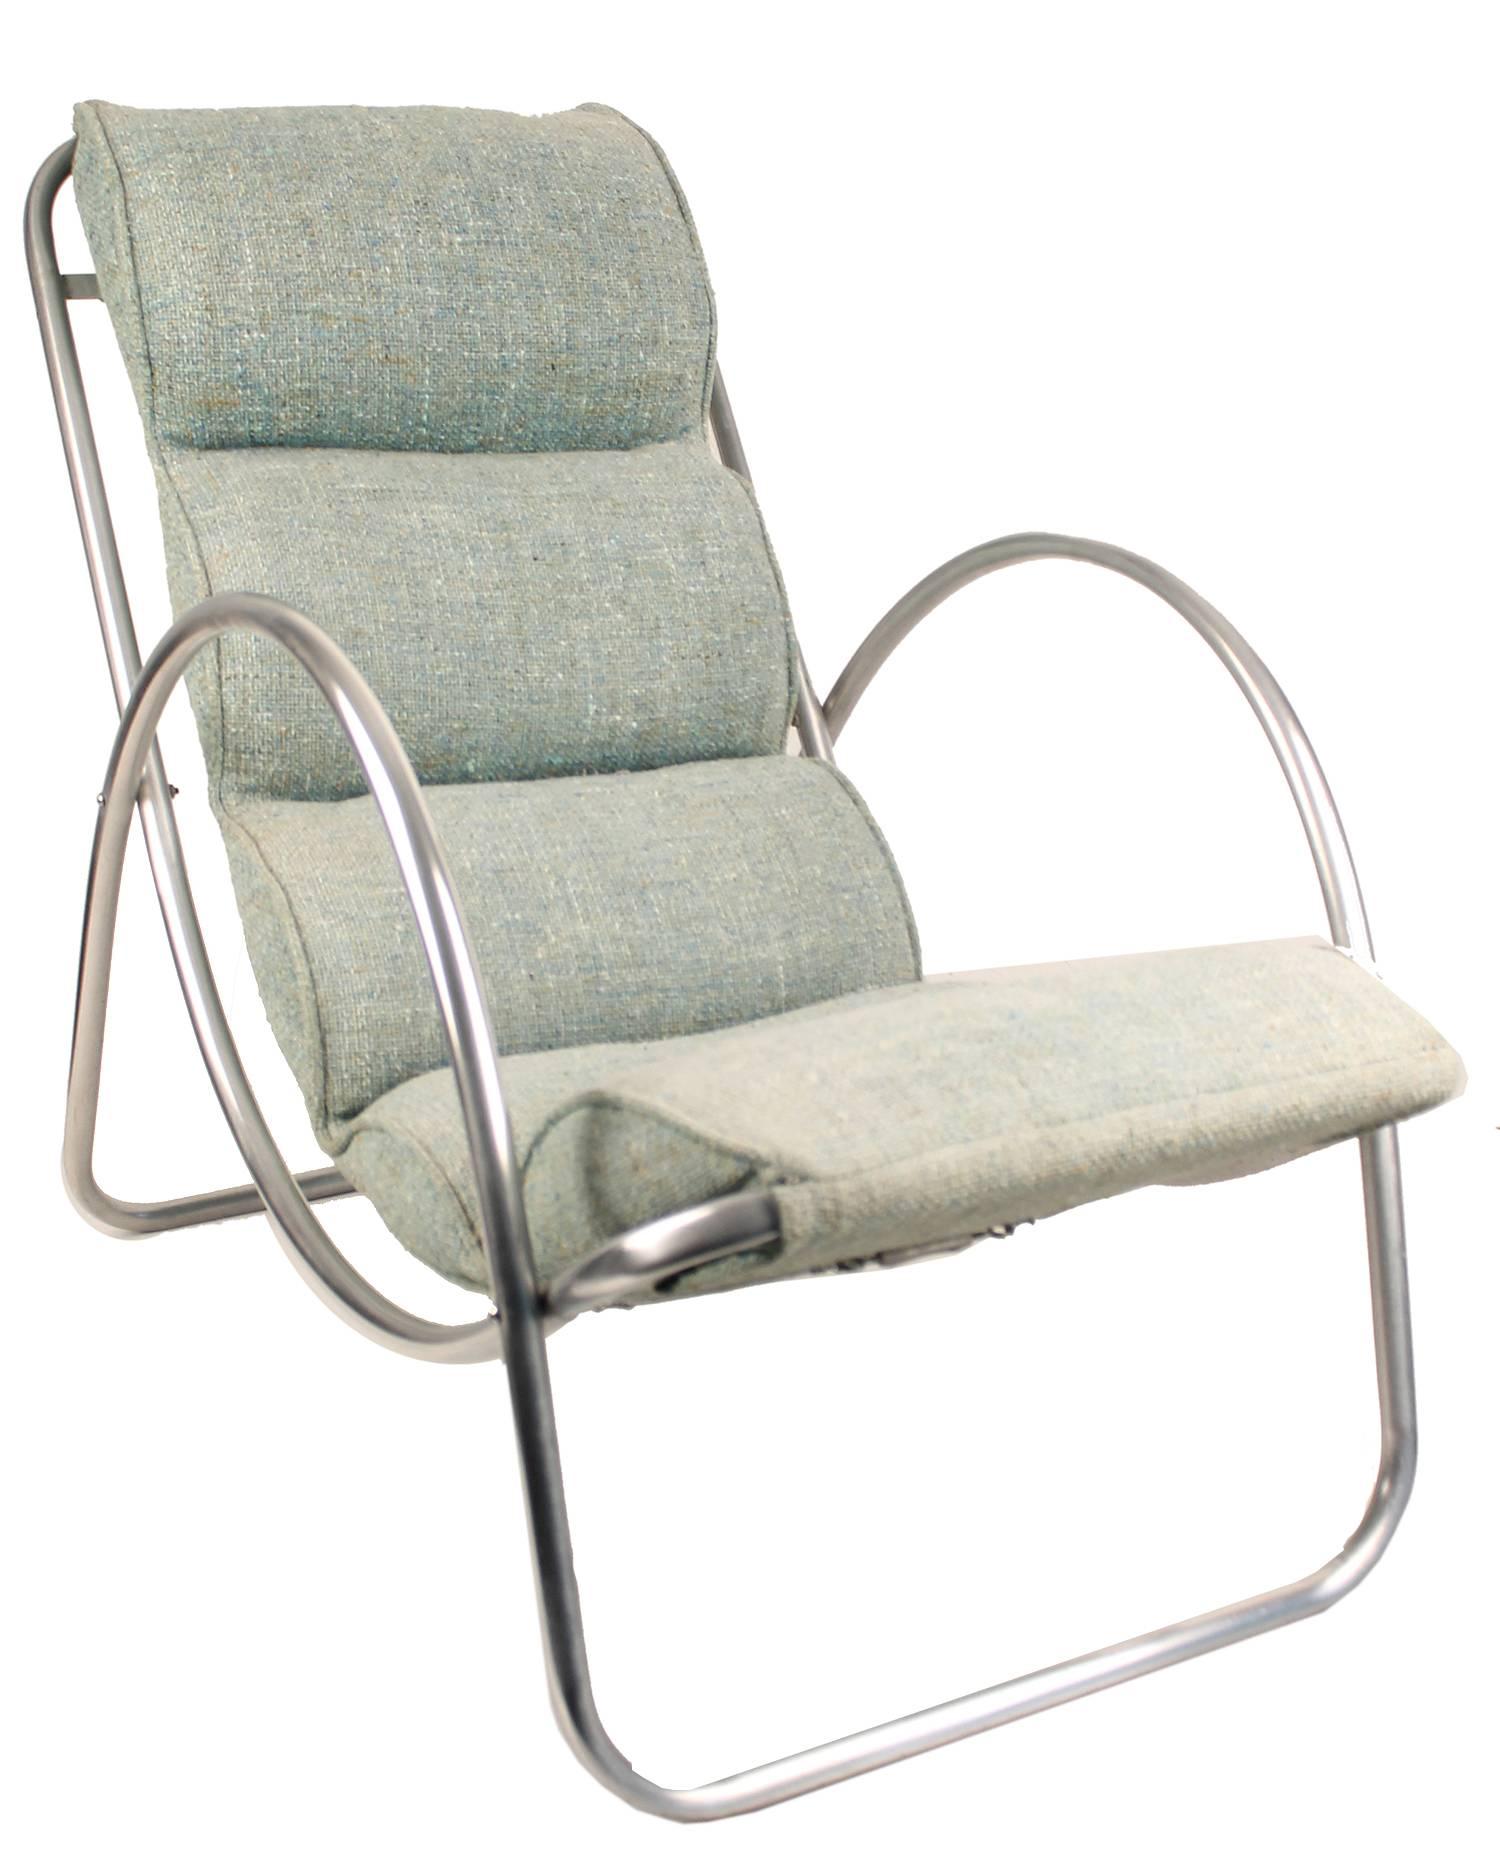 Art Deco lounge chairs, made by the Halliburton Company, circa 1930s. 

Richard Neutra used examples of these chairs for some of his earliest modernist commissions. 

All aluminum frame and original cushions, the light turquoise-greenuish-blue